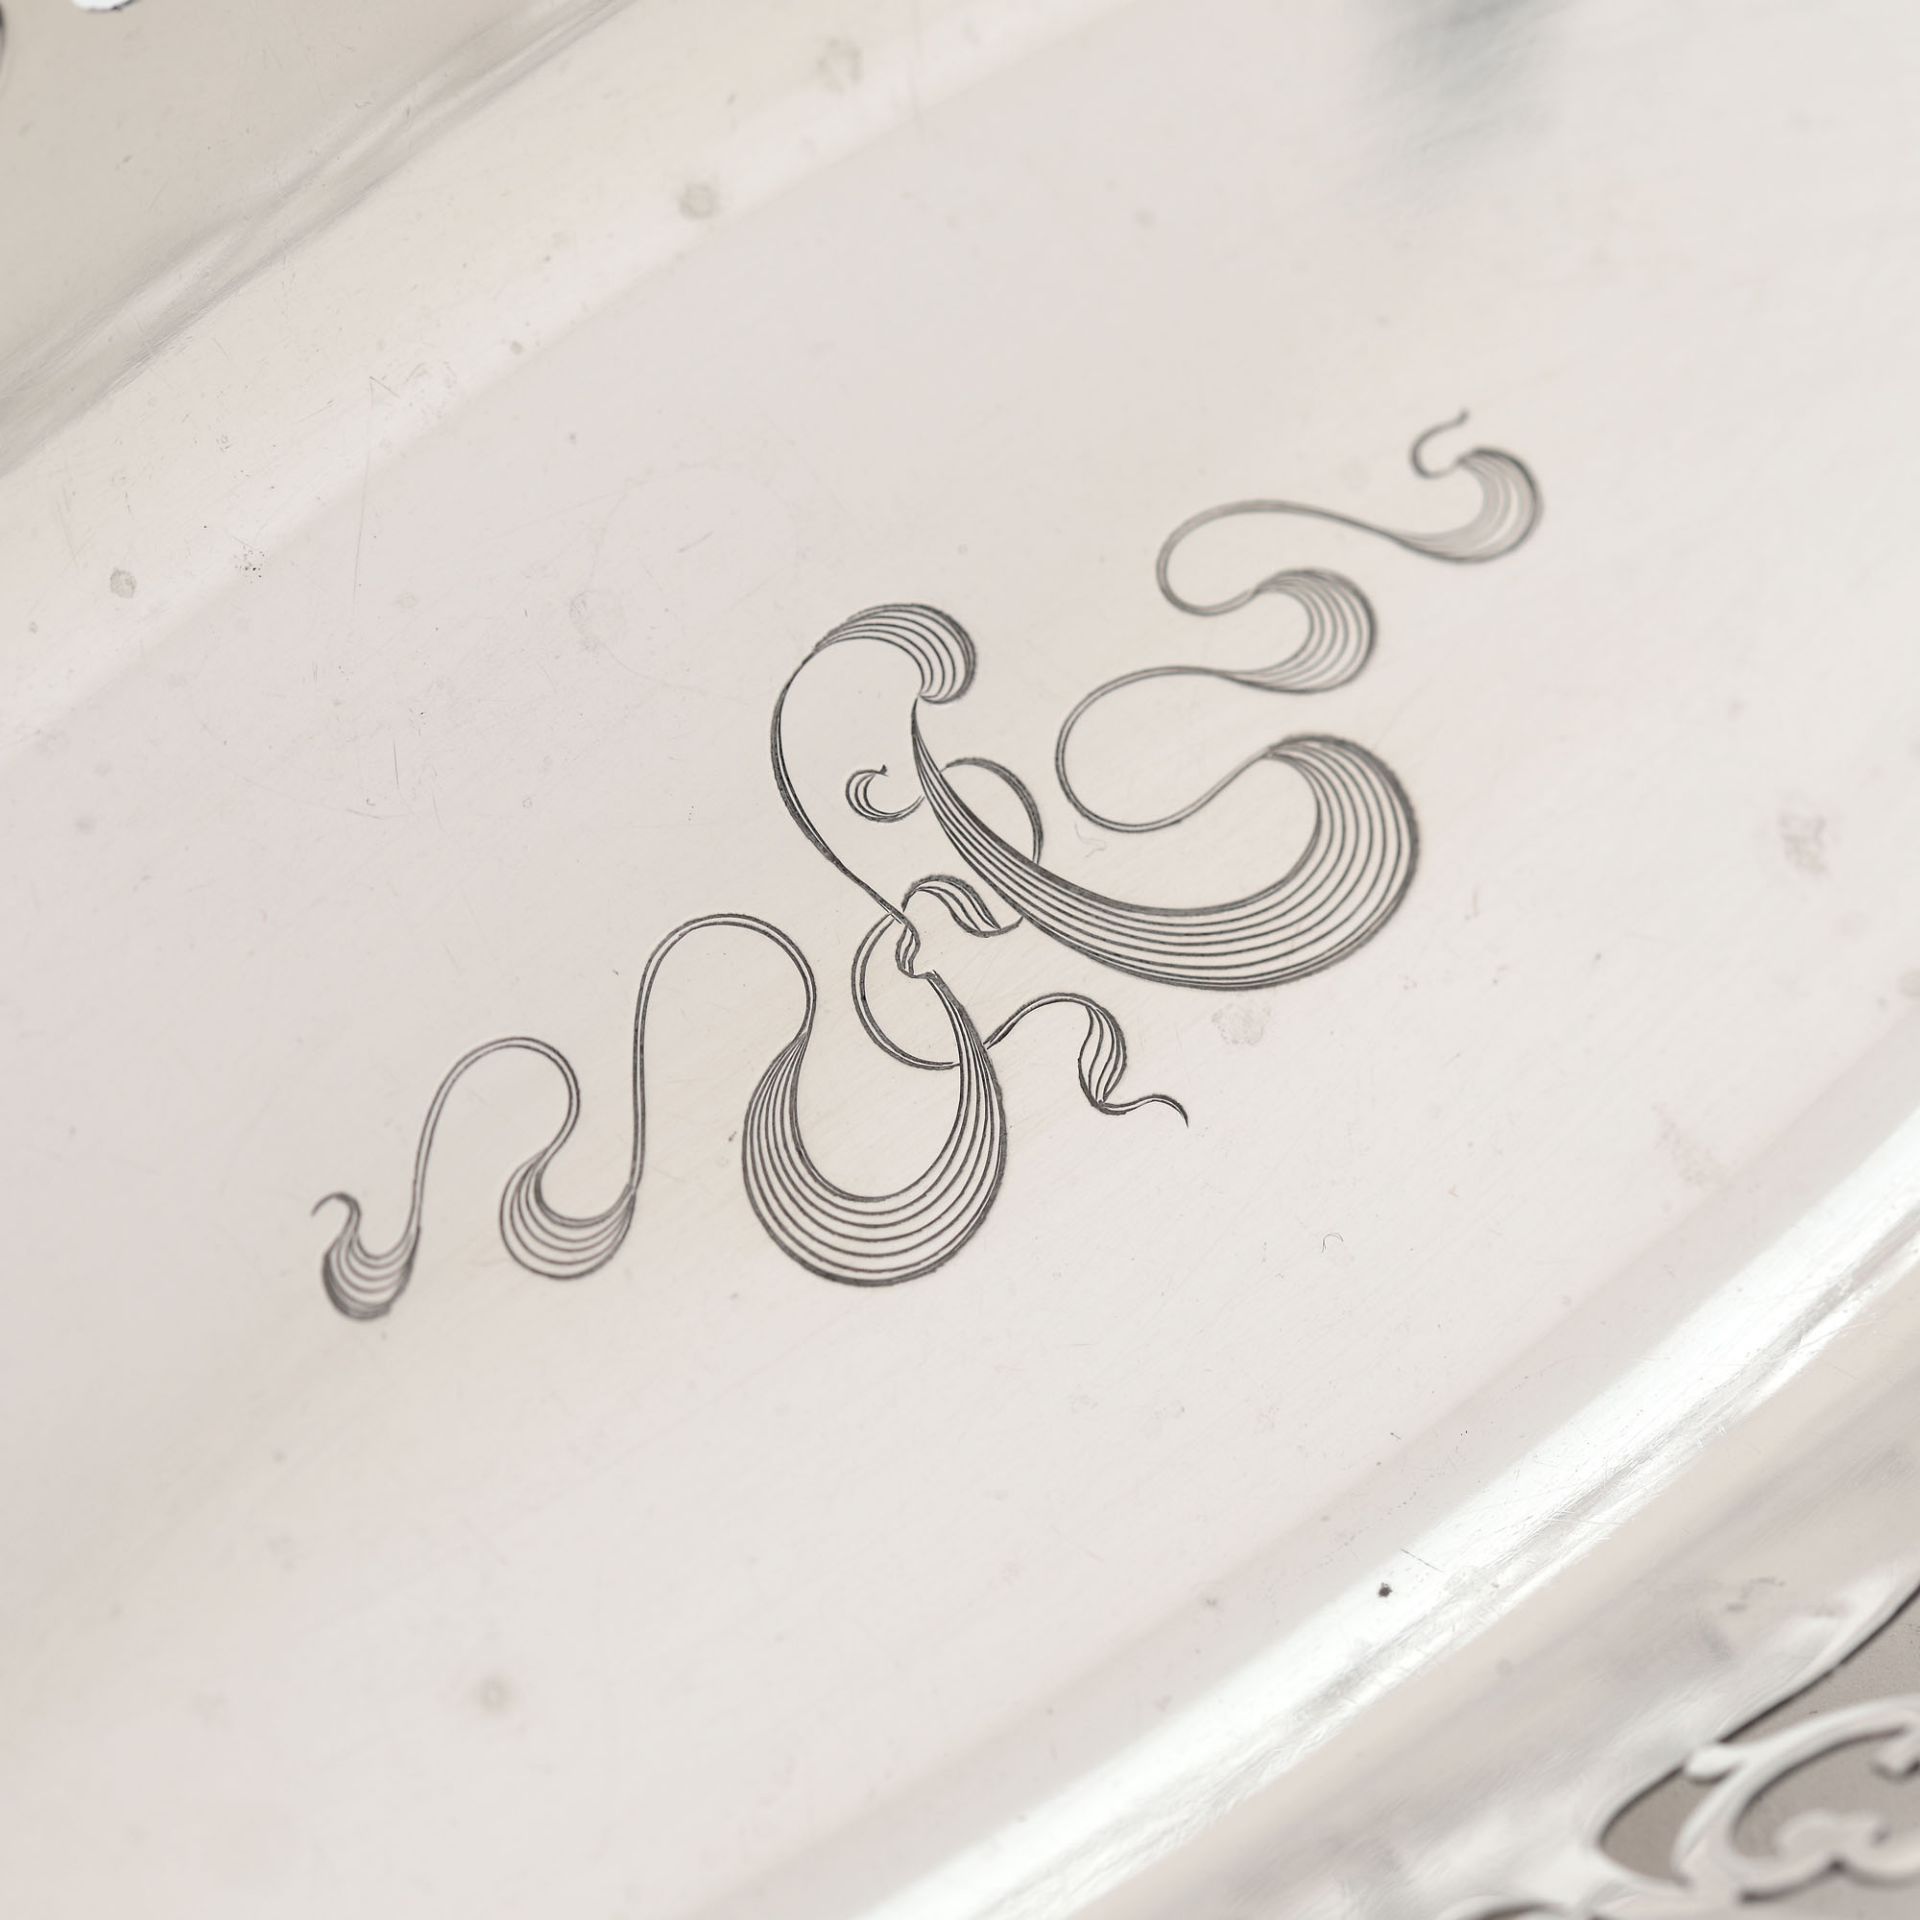 American workshop, Gorham silver fruit bowl with hand-perforated decoration, approx. 1906 - Image 3 of 4